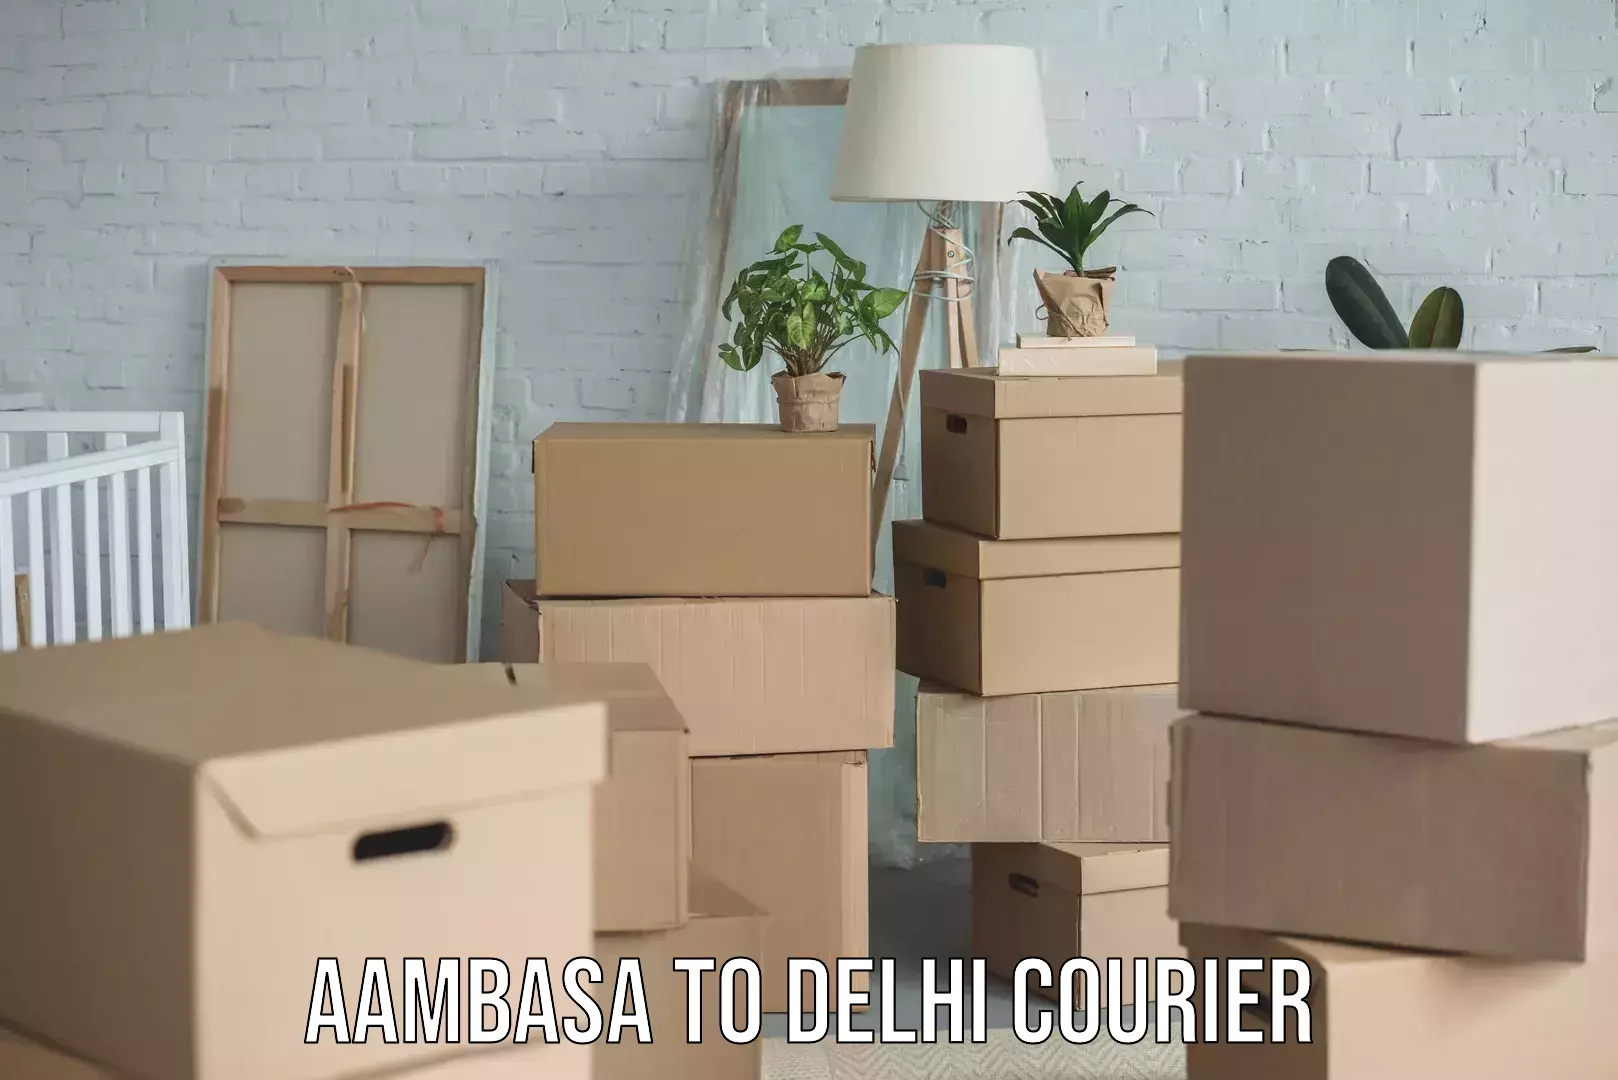 International courier networks Aambasa to Delhi